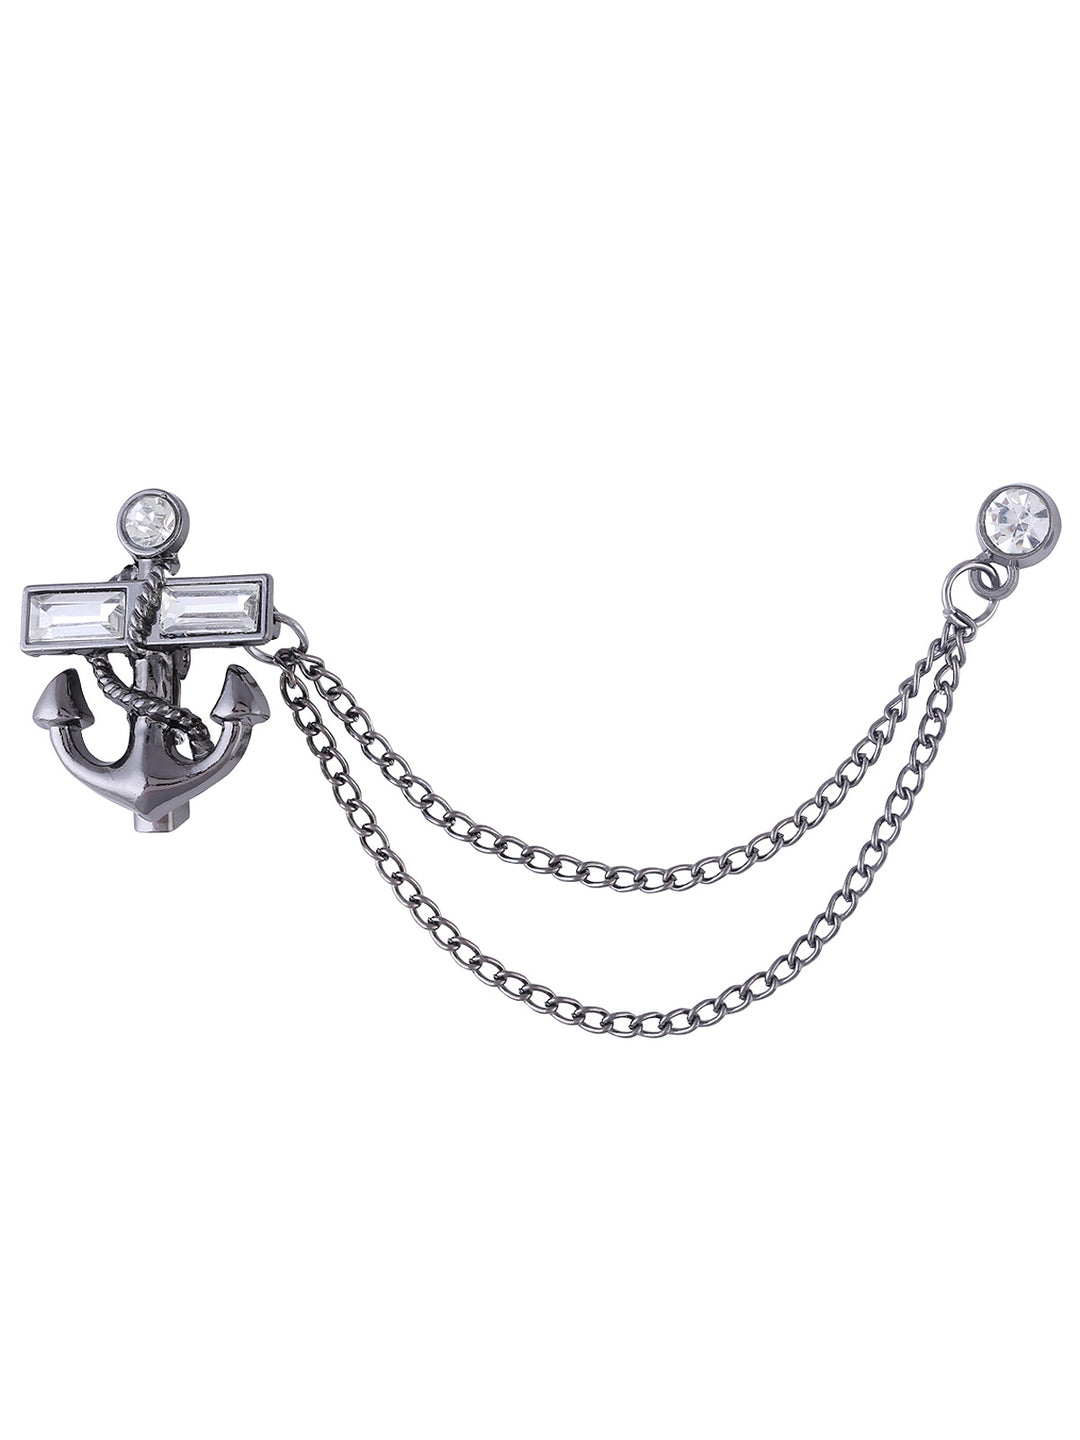 Classic Unisex Anchor with Chain Fashion Black Nickel (Gunmetal) Color Brooch